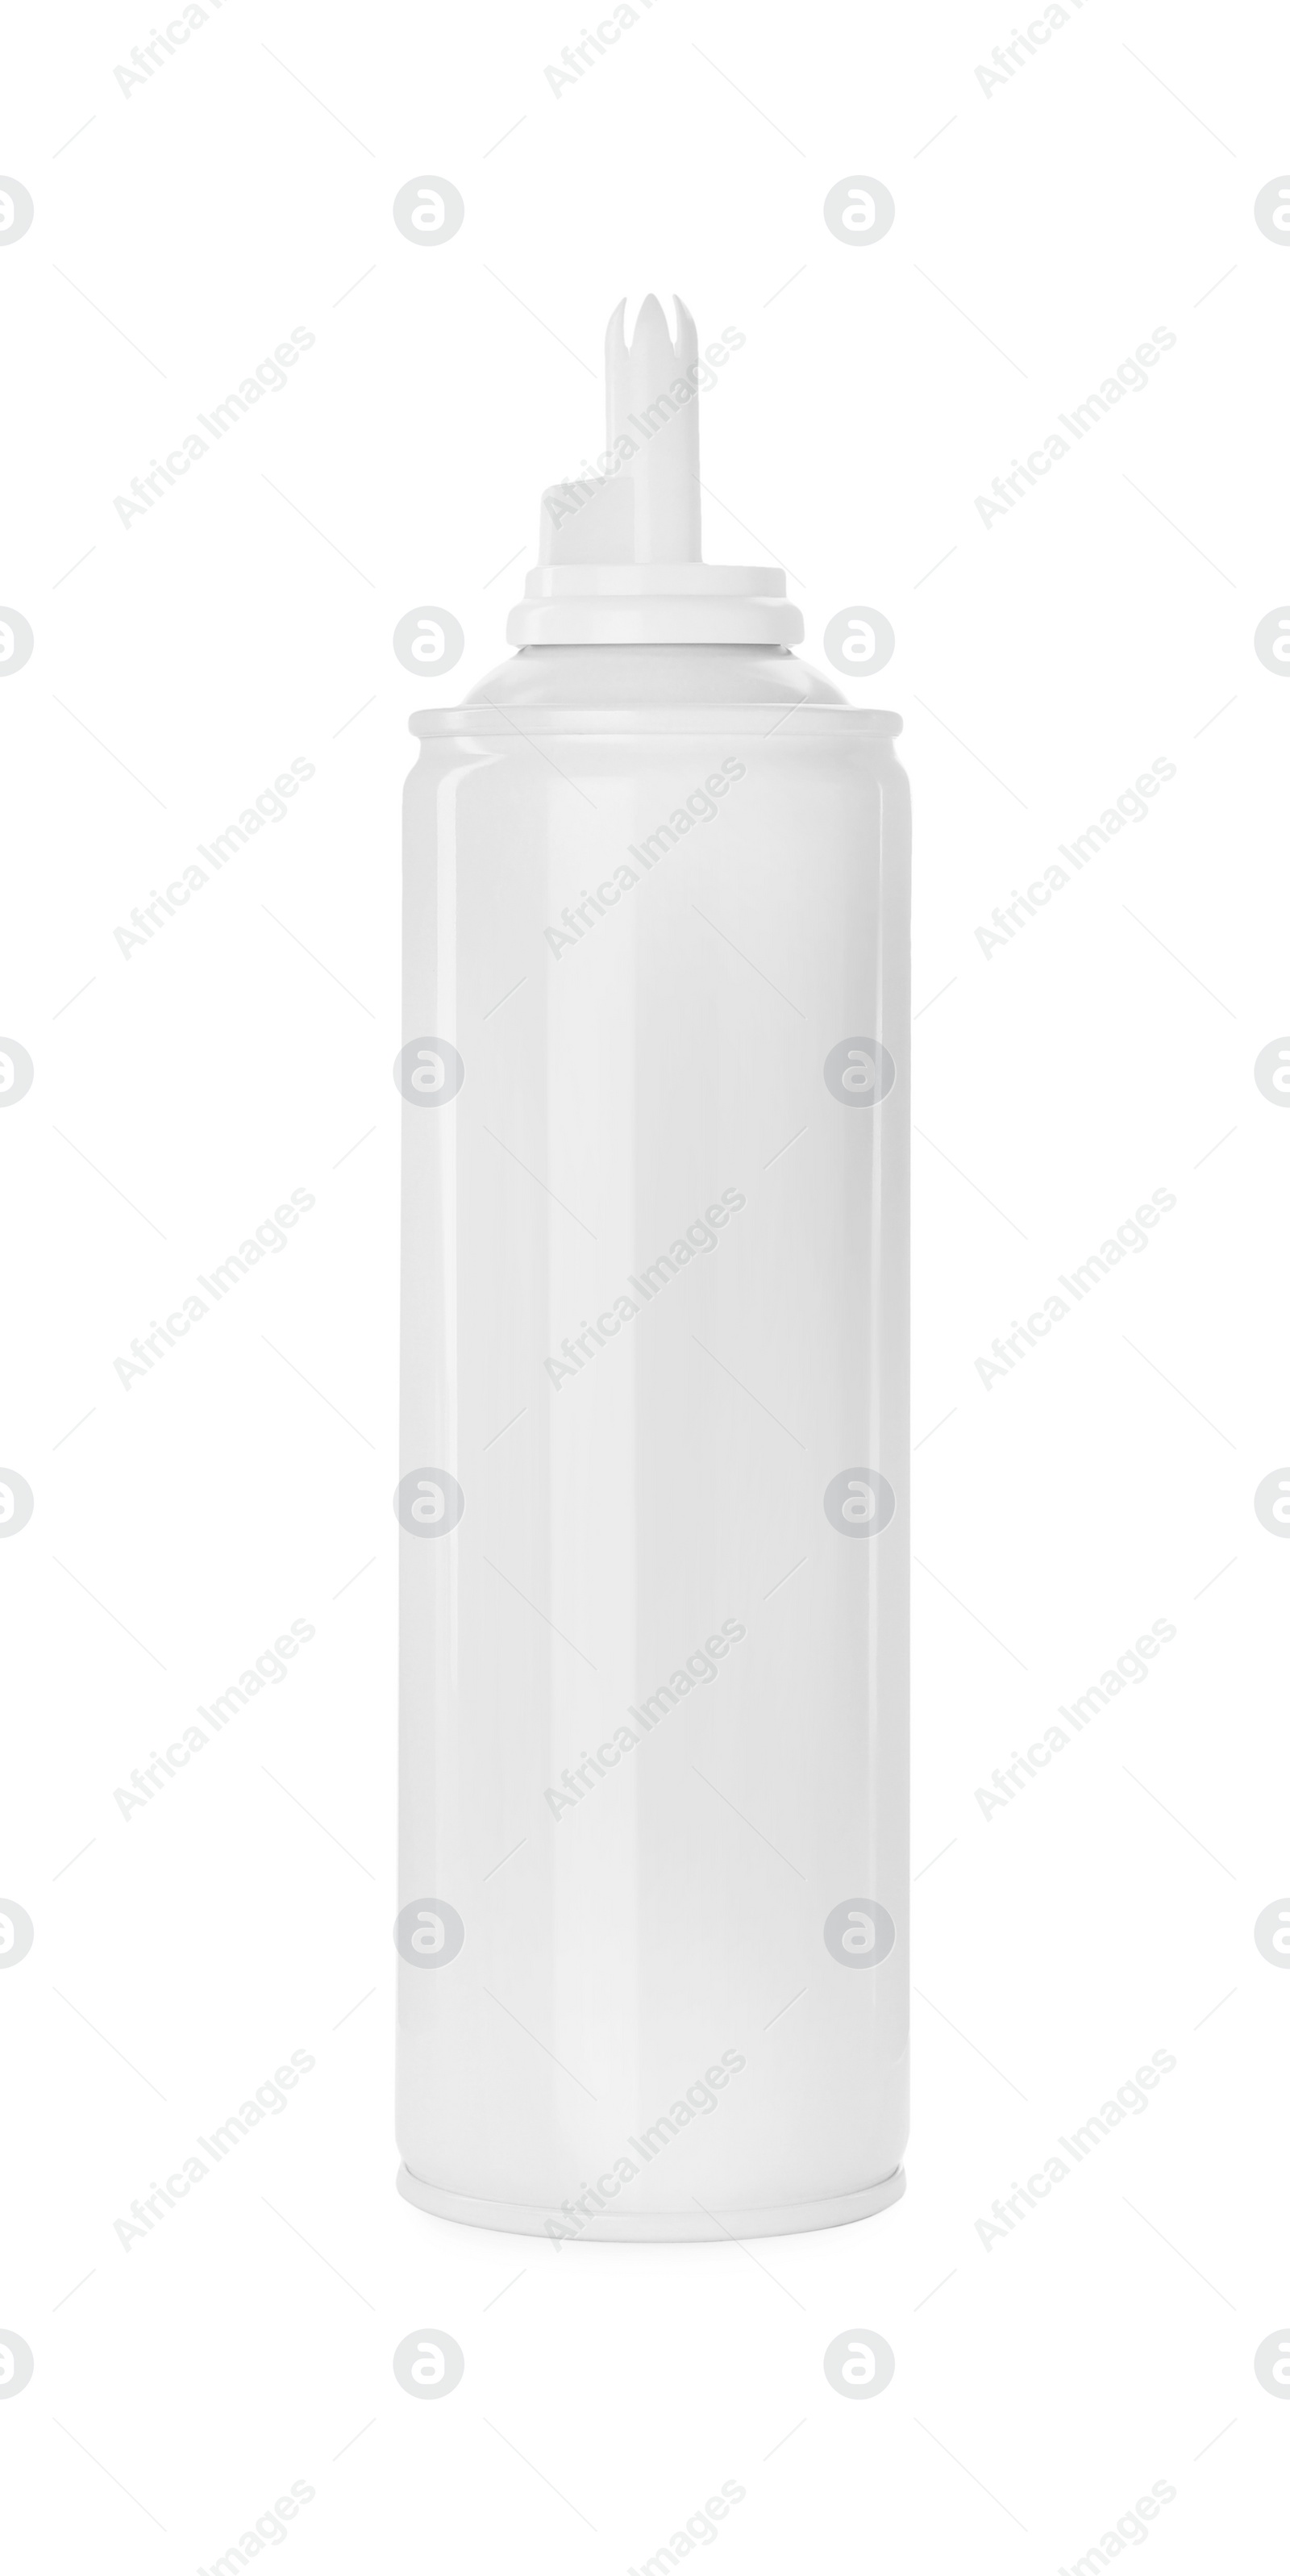 Photo of Bottle of delicious whipped cream isolated on white